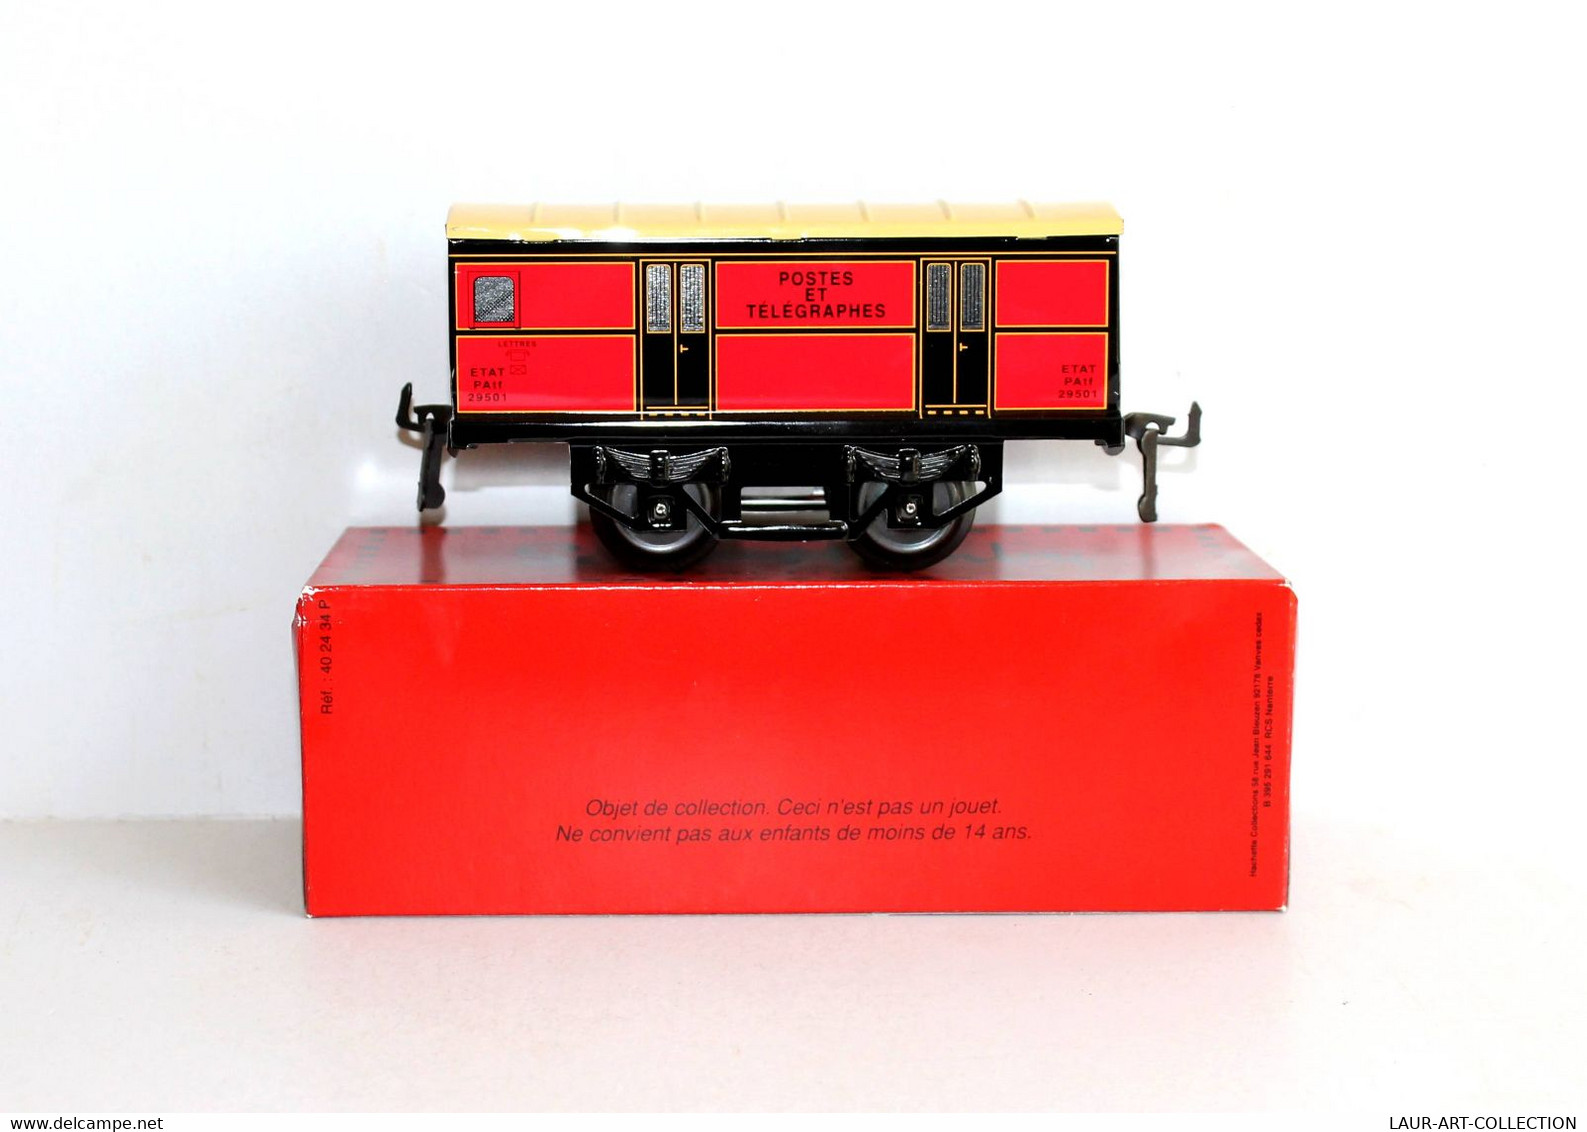 SERIE HORNBY - WAGON MARCHANDISE - ECH O N°402385S - POSTES ET TELEGRAPHES 29501 / FERROVIAIRE TRAIN CHEMIN FER (2105.19 - Wagons Voor Passagiers